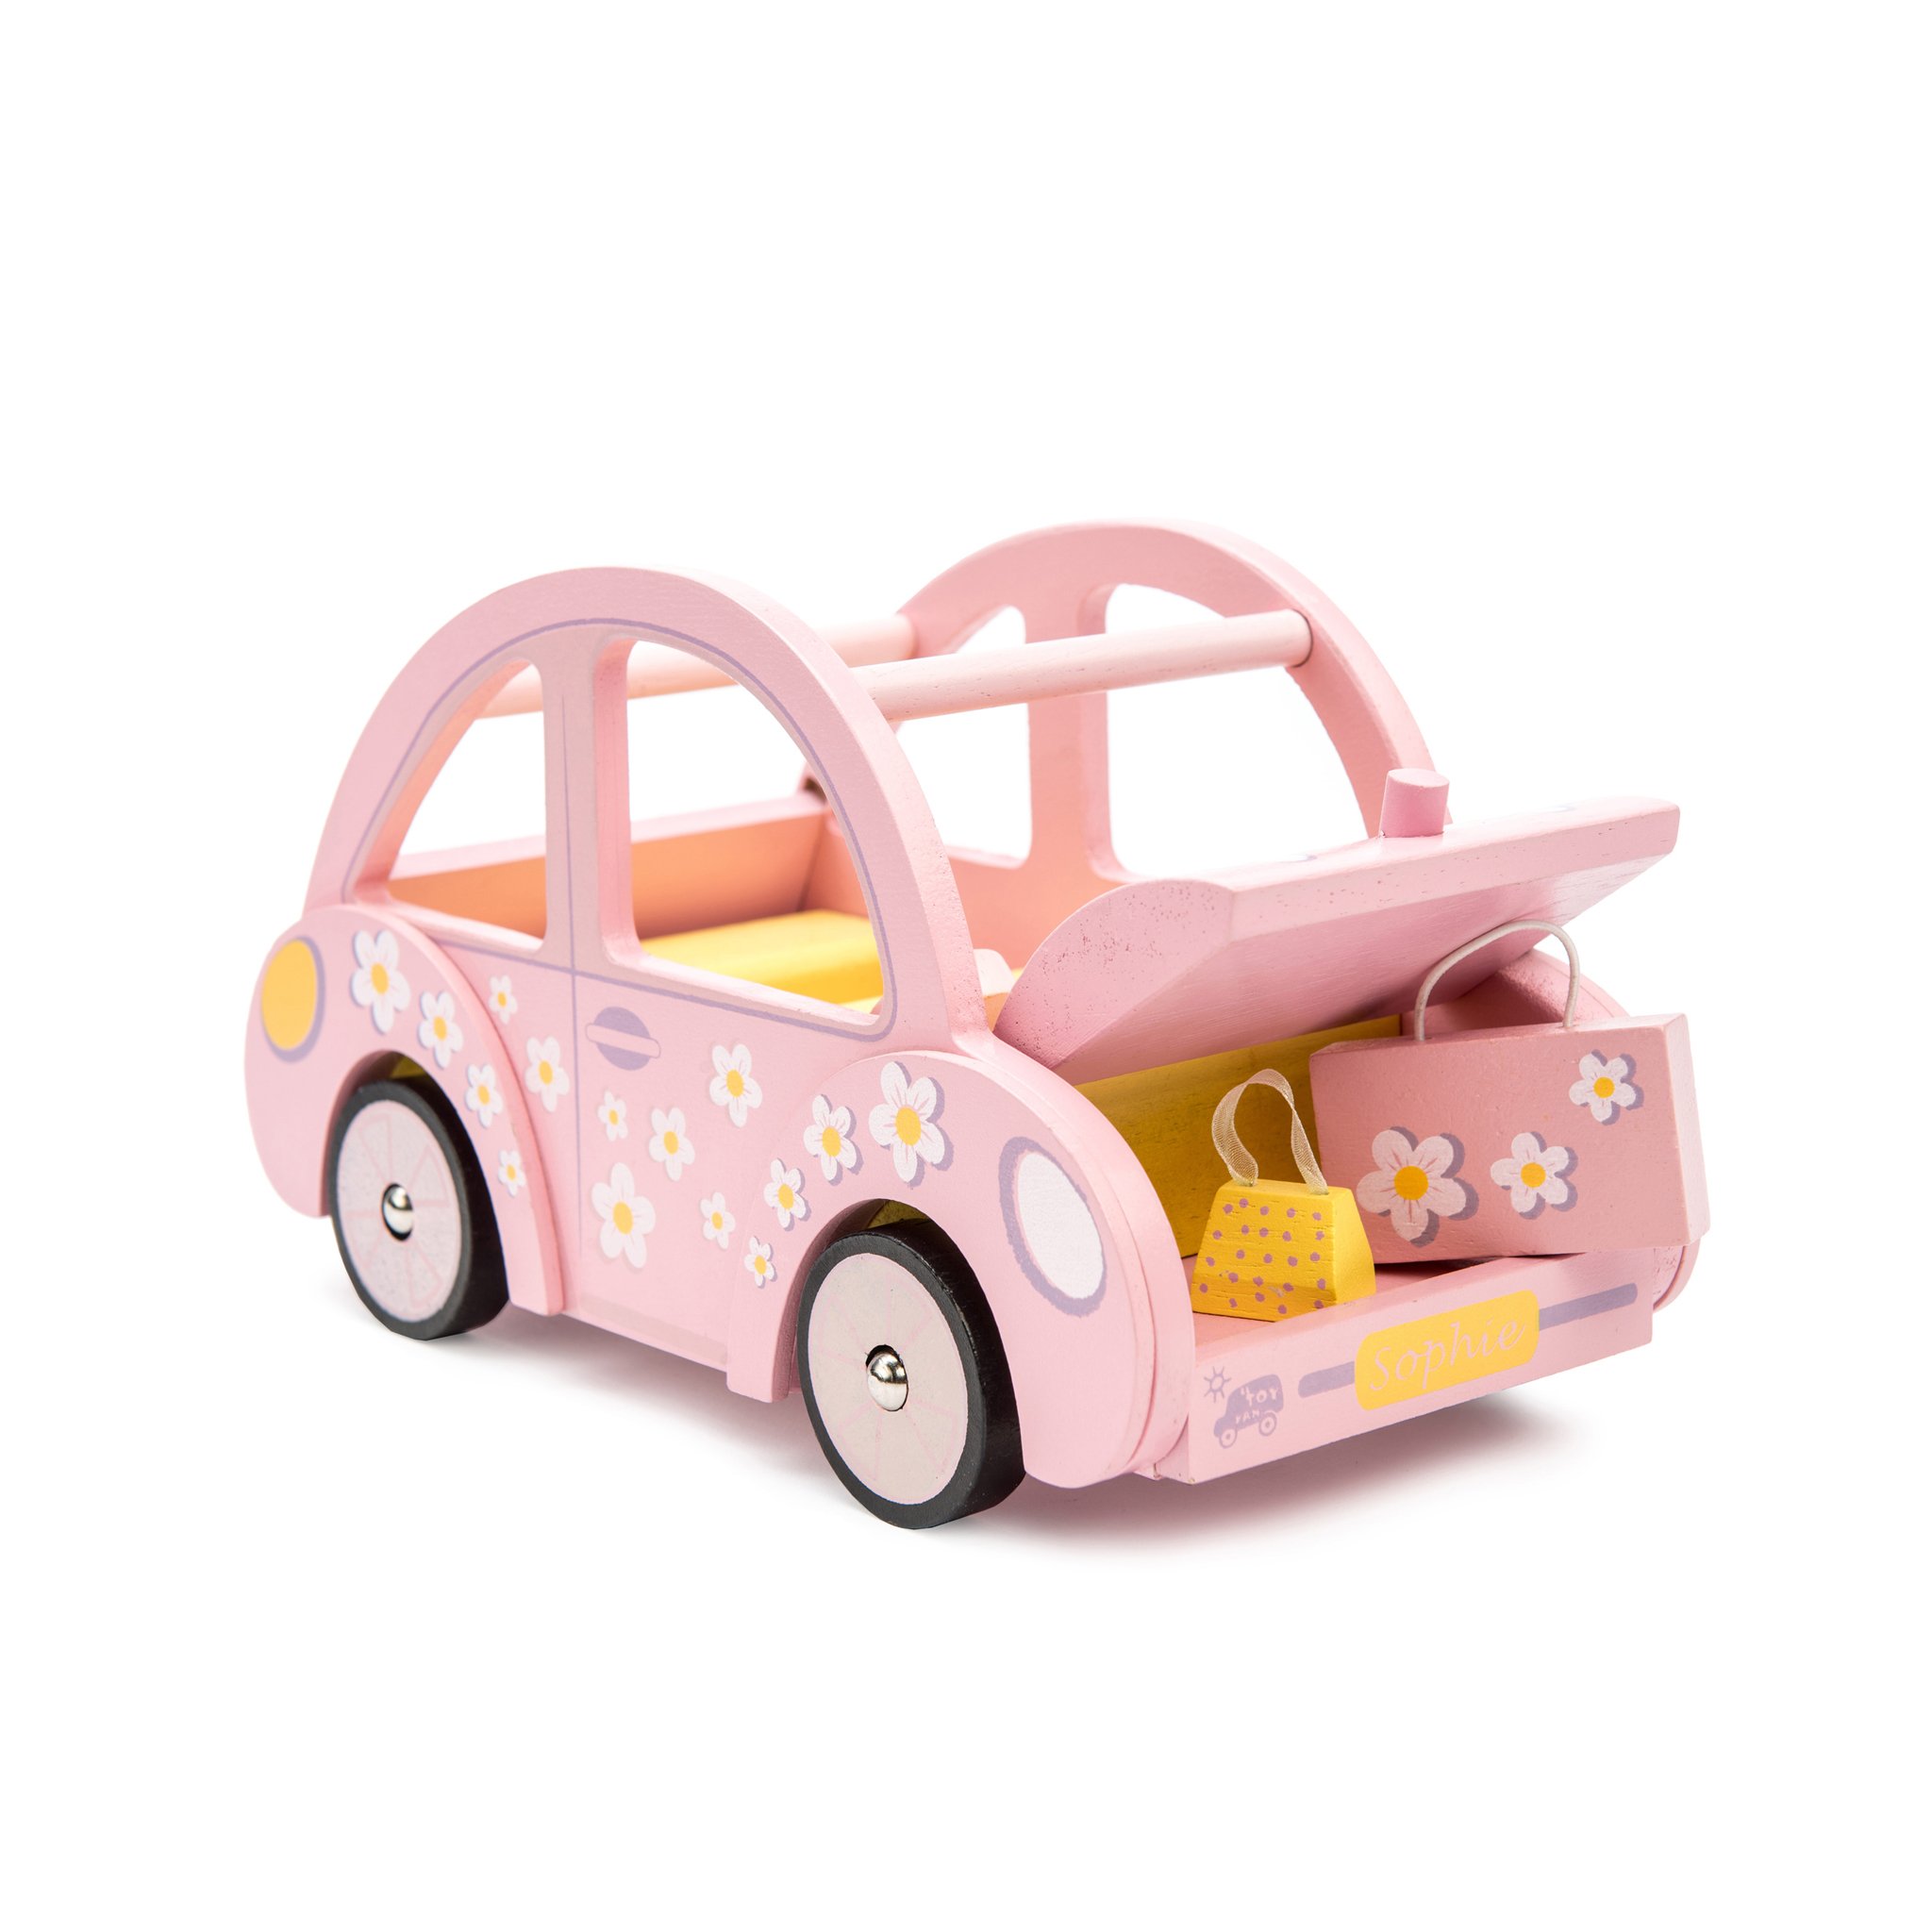 Sophie's Pretty Pink Wooden Car